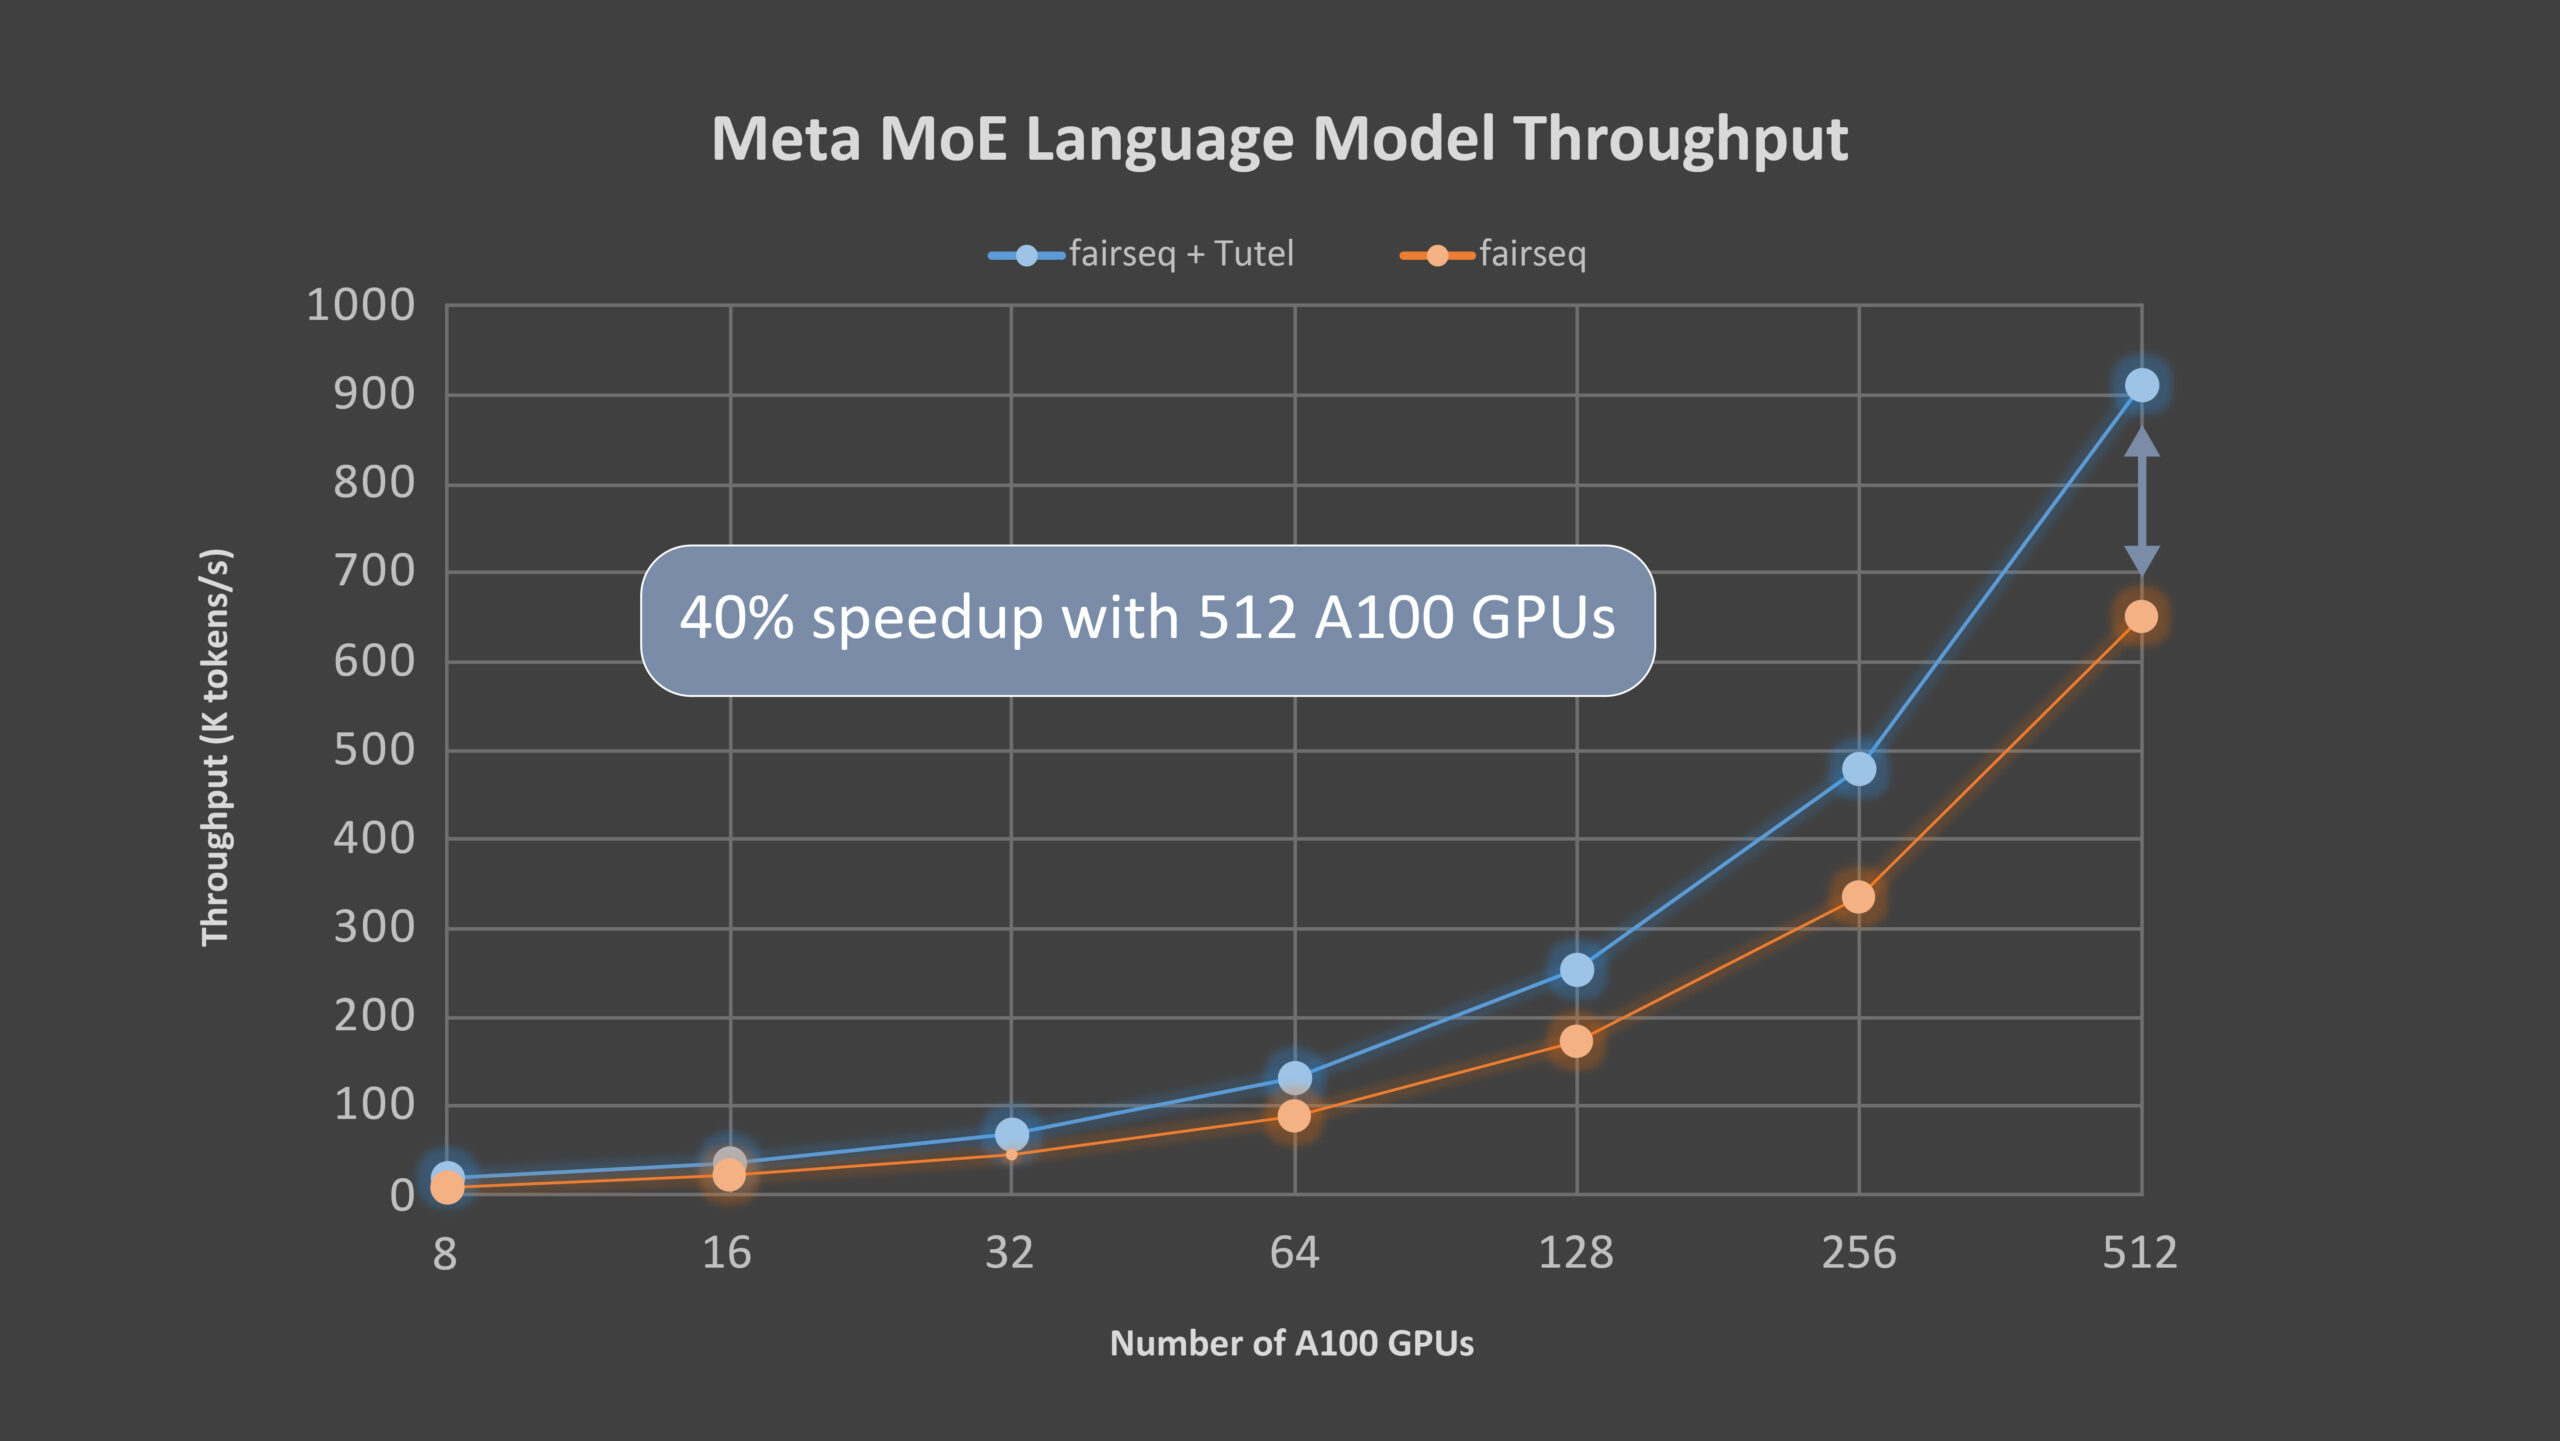 A line graph comparing the end-to-end performance of Meta’s MoE language model using Azure NDm A100 v4 VMs with and without Tutel. The x-axis is the number of A100 (80GB) GPUs, beginning at 8 and going up to 512, and the y-axis is the throughput (K tokens/s), beginning with 0 and going up to 1,000 in intervals of 100. Tutel always achieves higher throughput than fairseq.